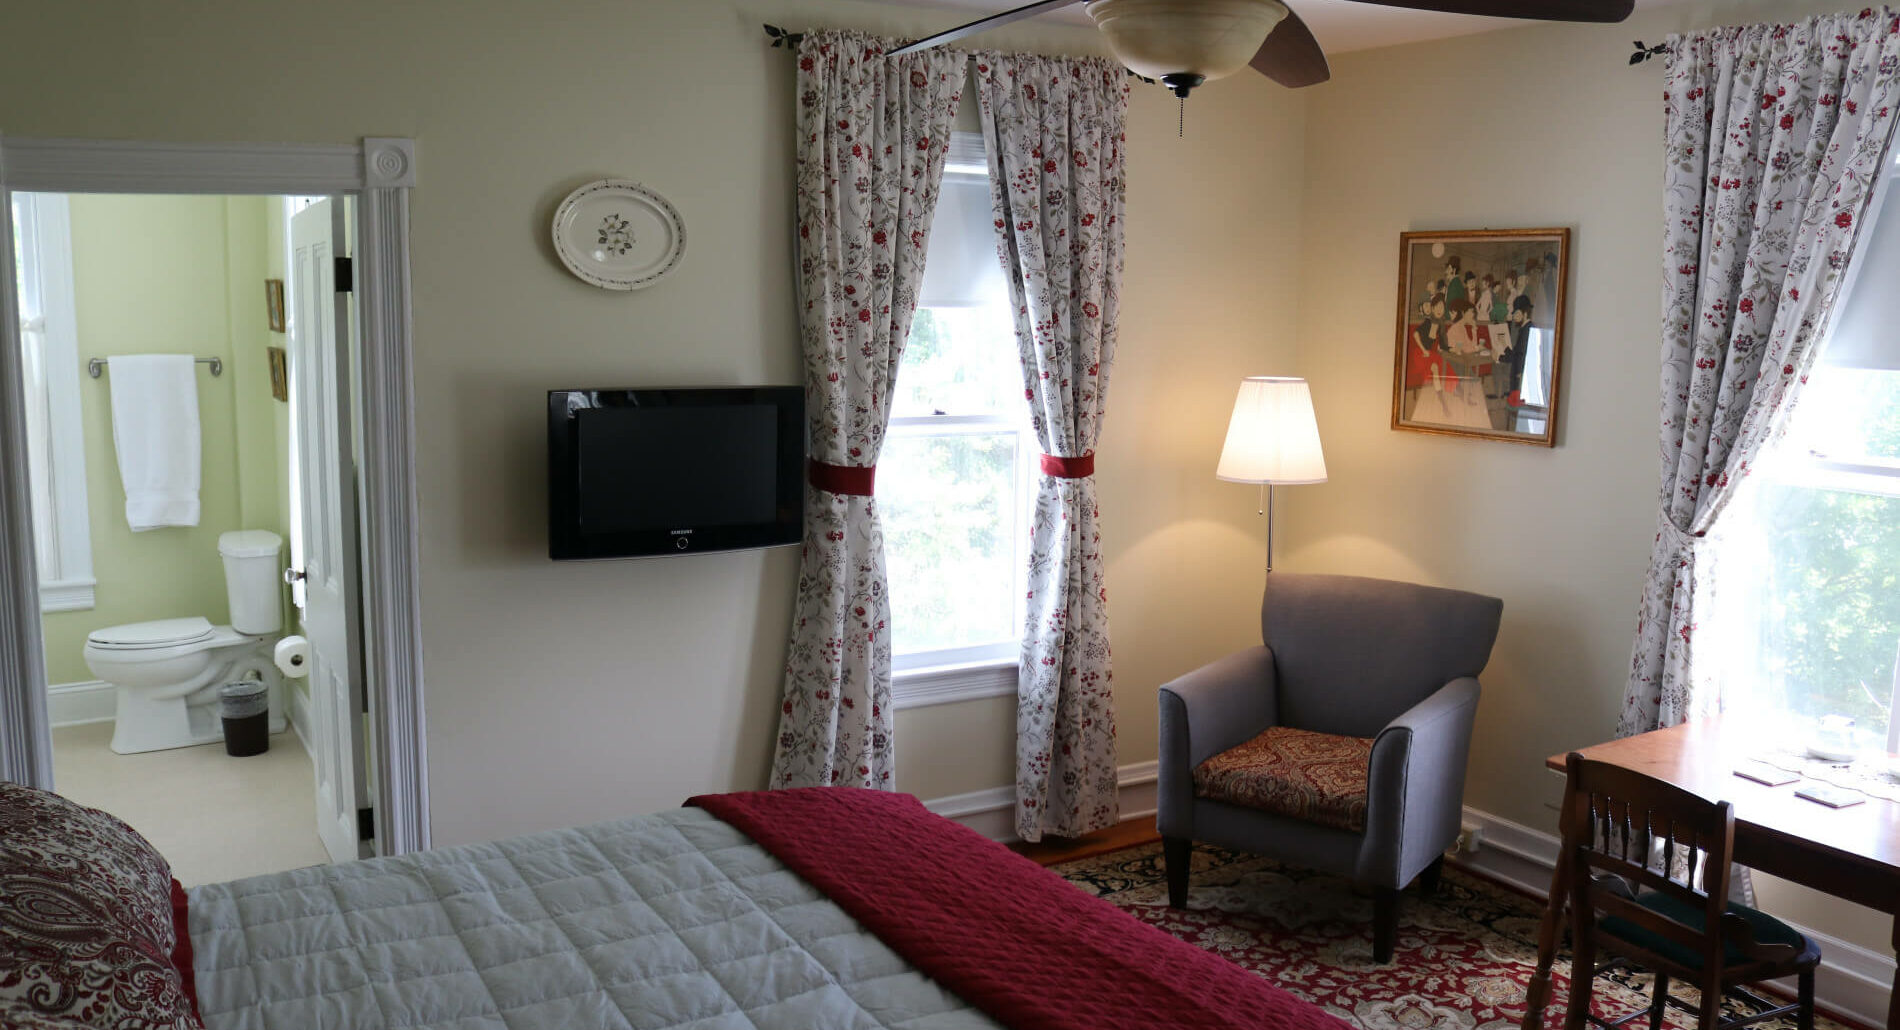 Bedroom with two windows with flowered curtains, table, chair, and reading lamp, red rug. Bed in foreground, looking into bathroom.